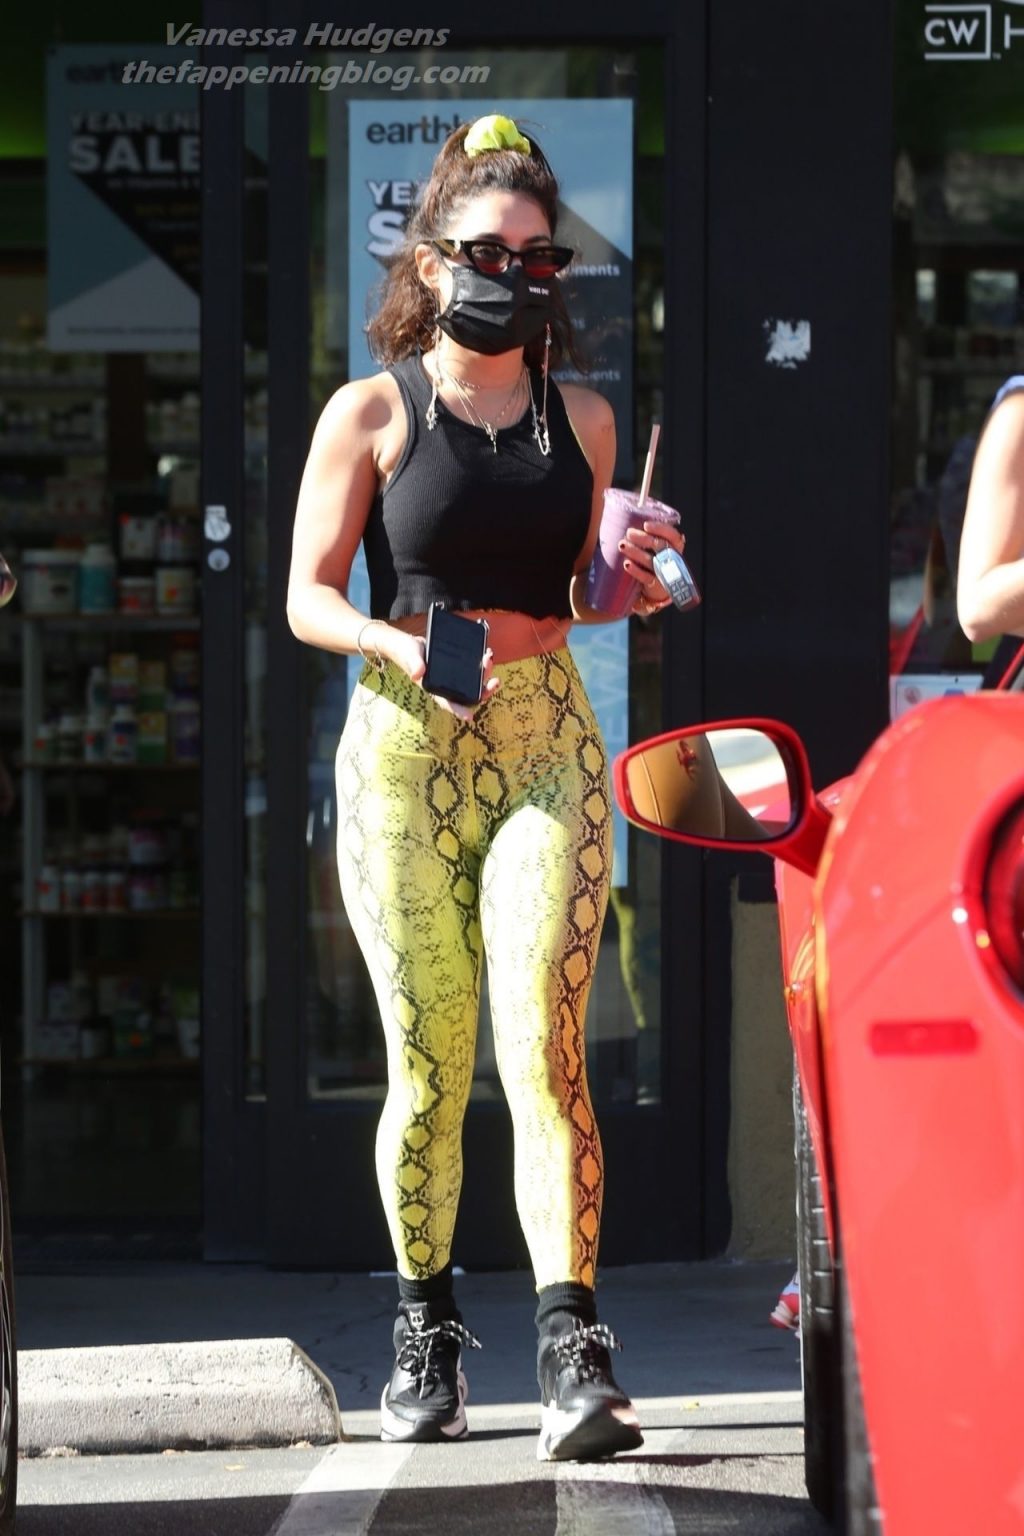 Vanessa Hudgens Gets Fit in Exotic Tights (31 Photos)